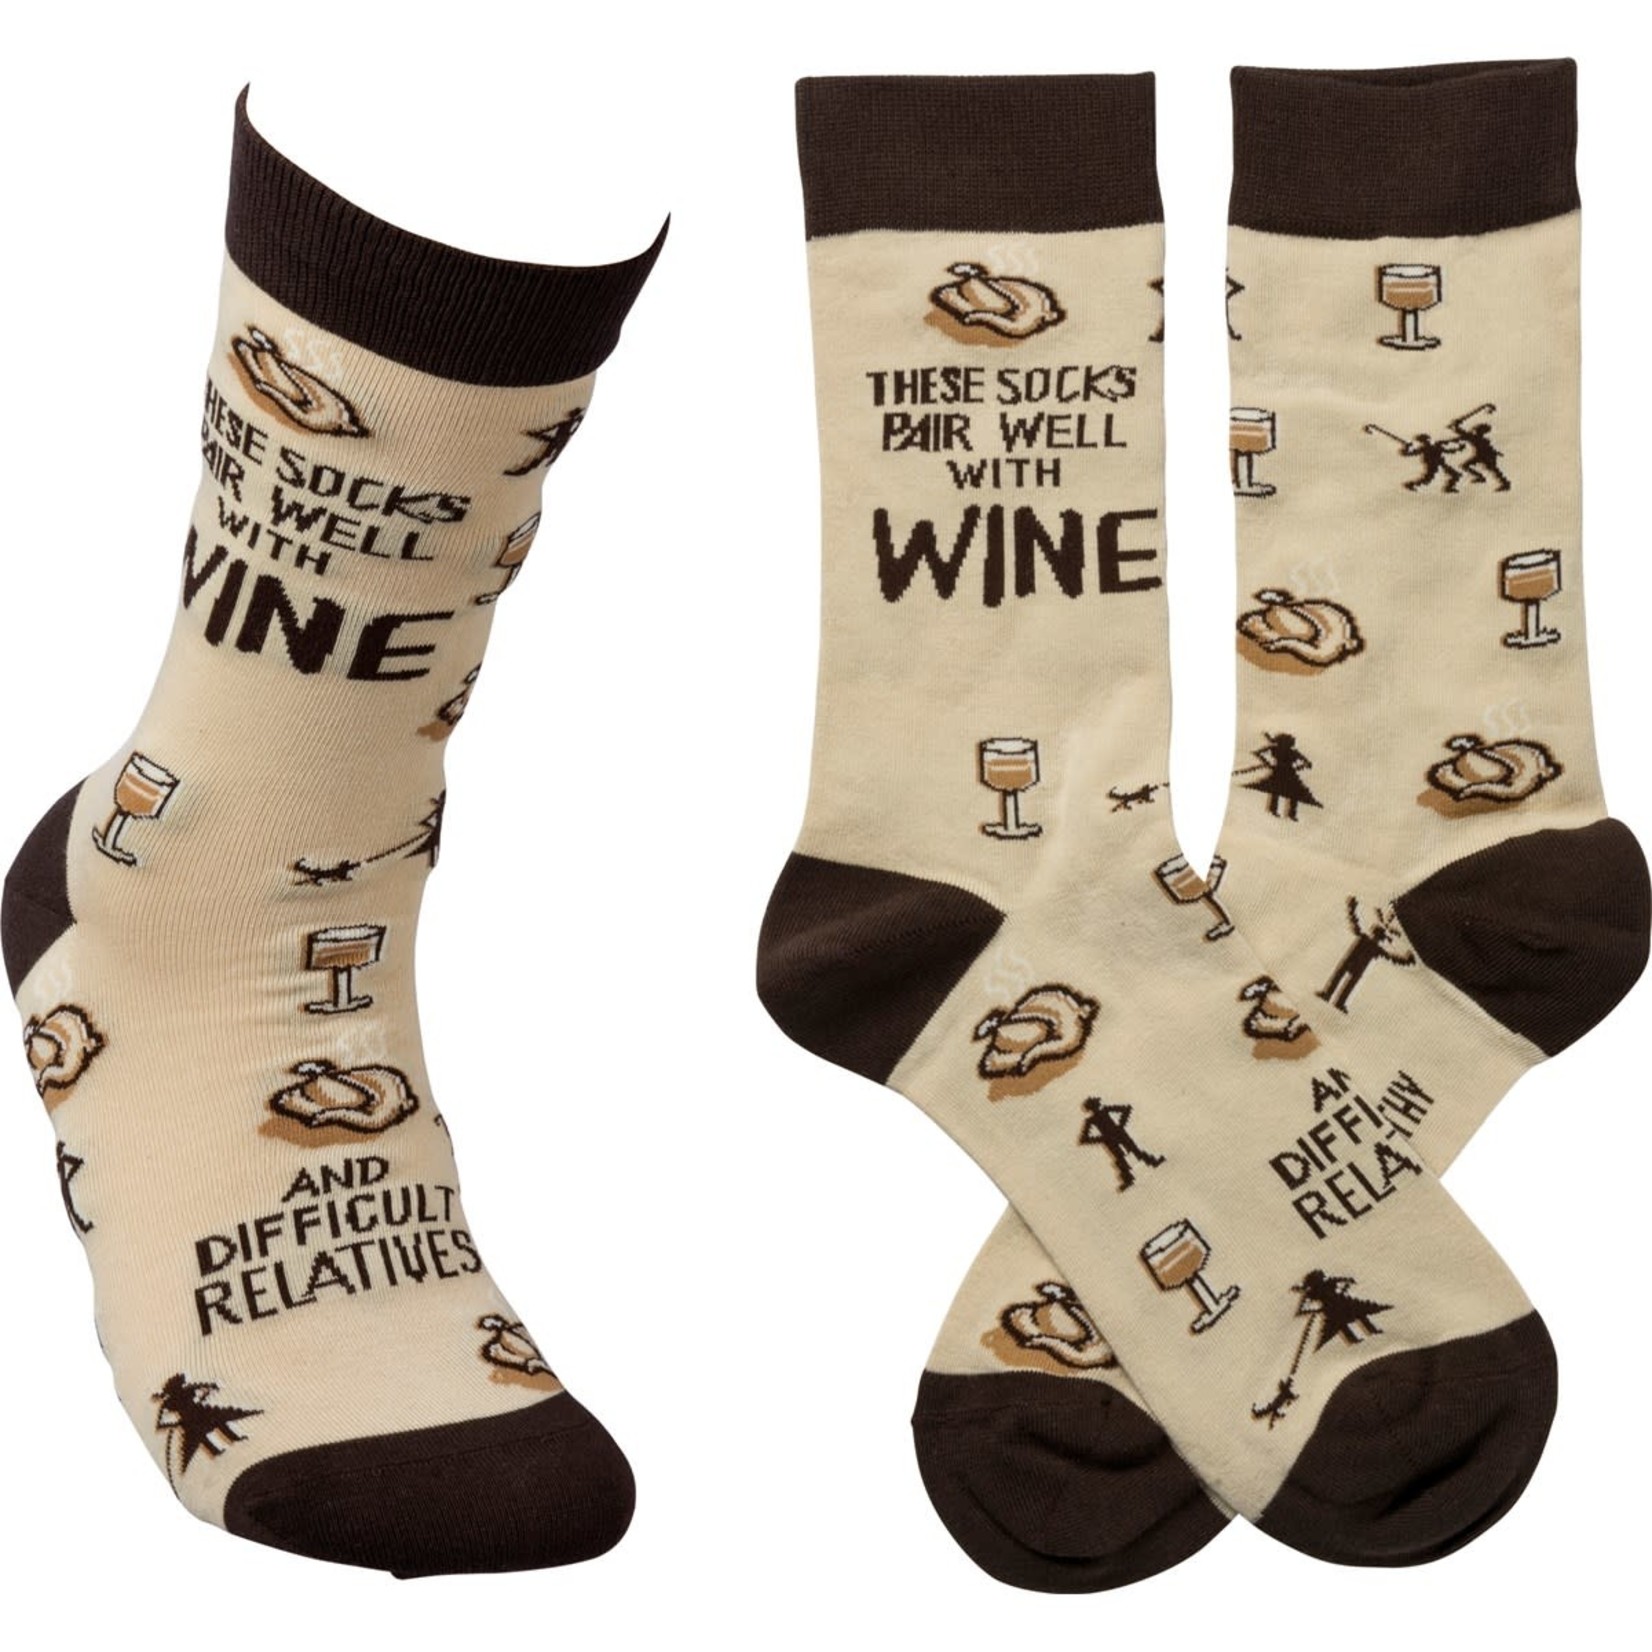 SOCKS PAIR WELL WITH WINE